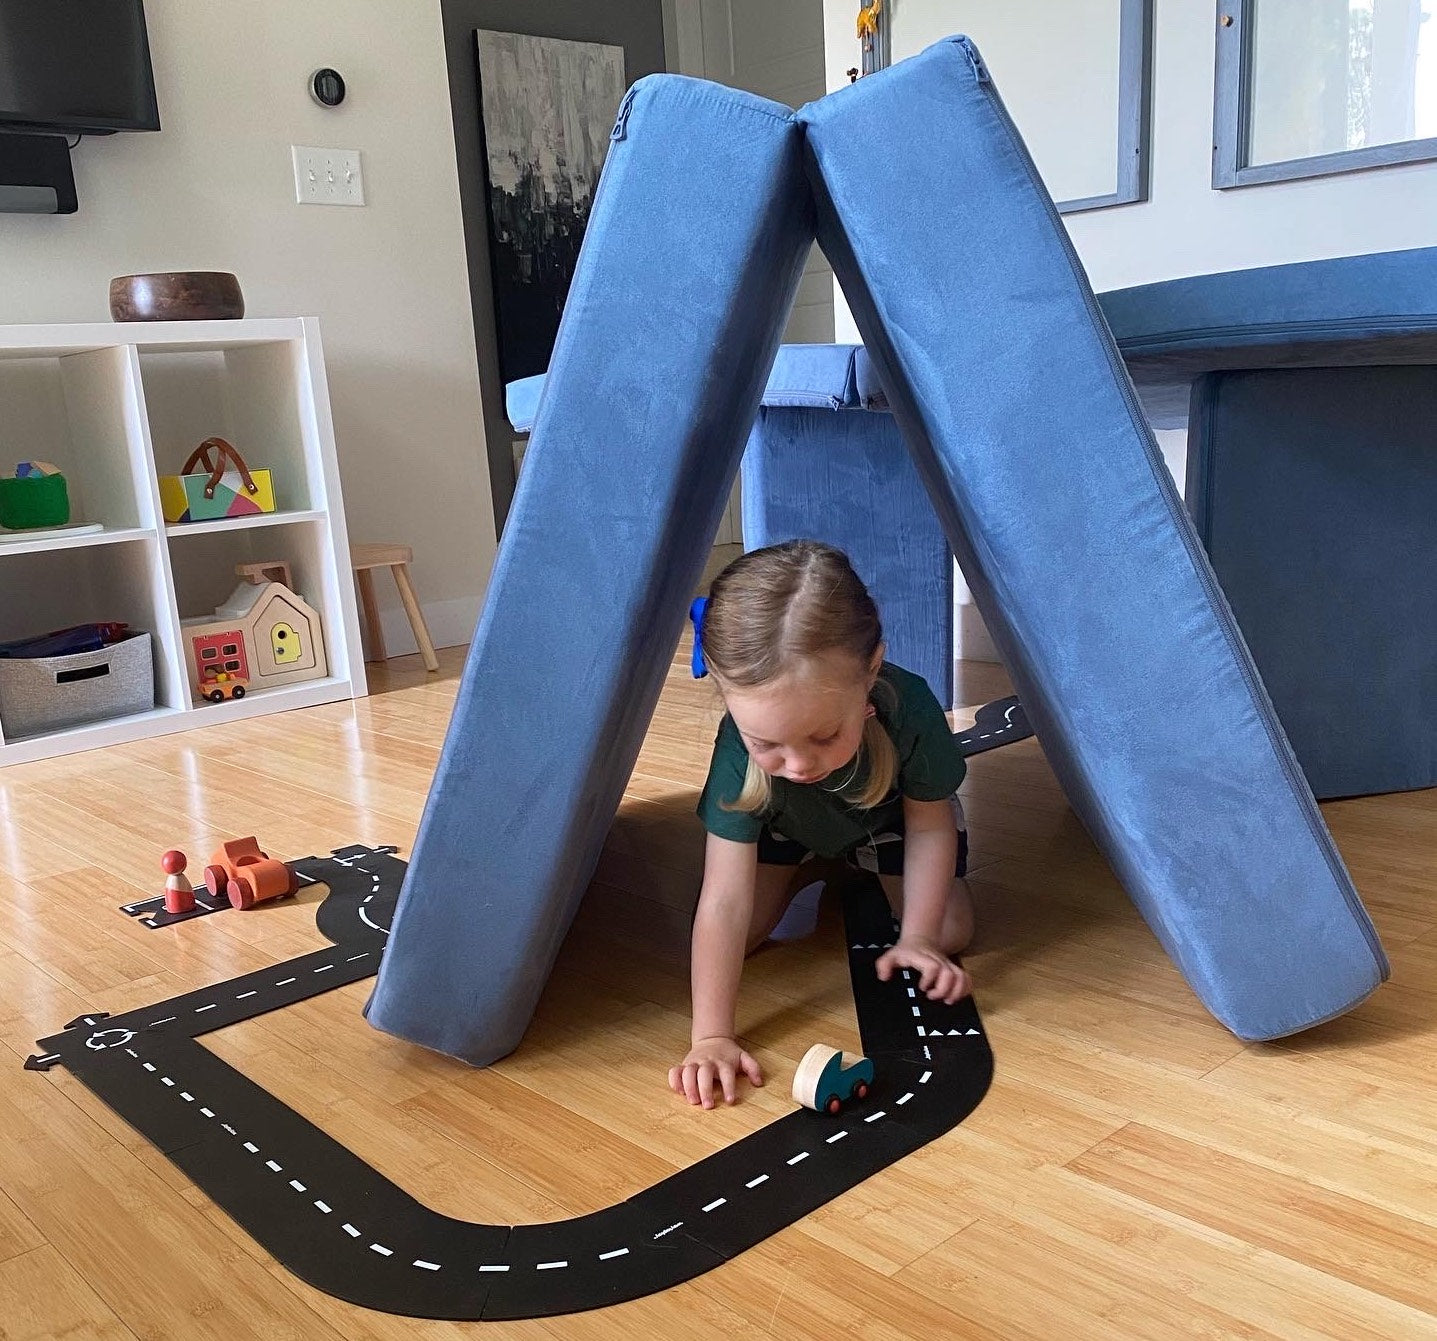 Child playing with a toy car on a toy road that goes from a parking lot, through a Nugget tunnel made by a folded over cushion and into a Nugget garage, made by stacking a flat cushion on top of two pillow pillars.